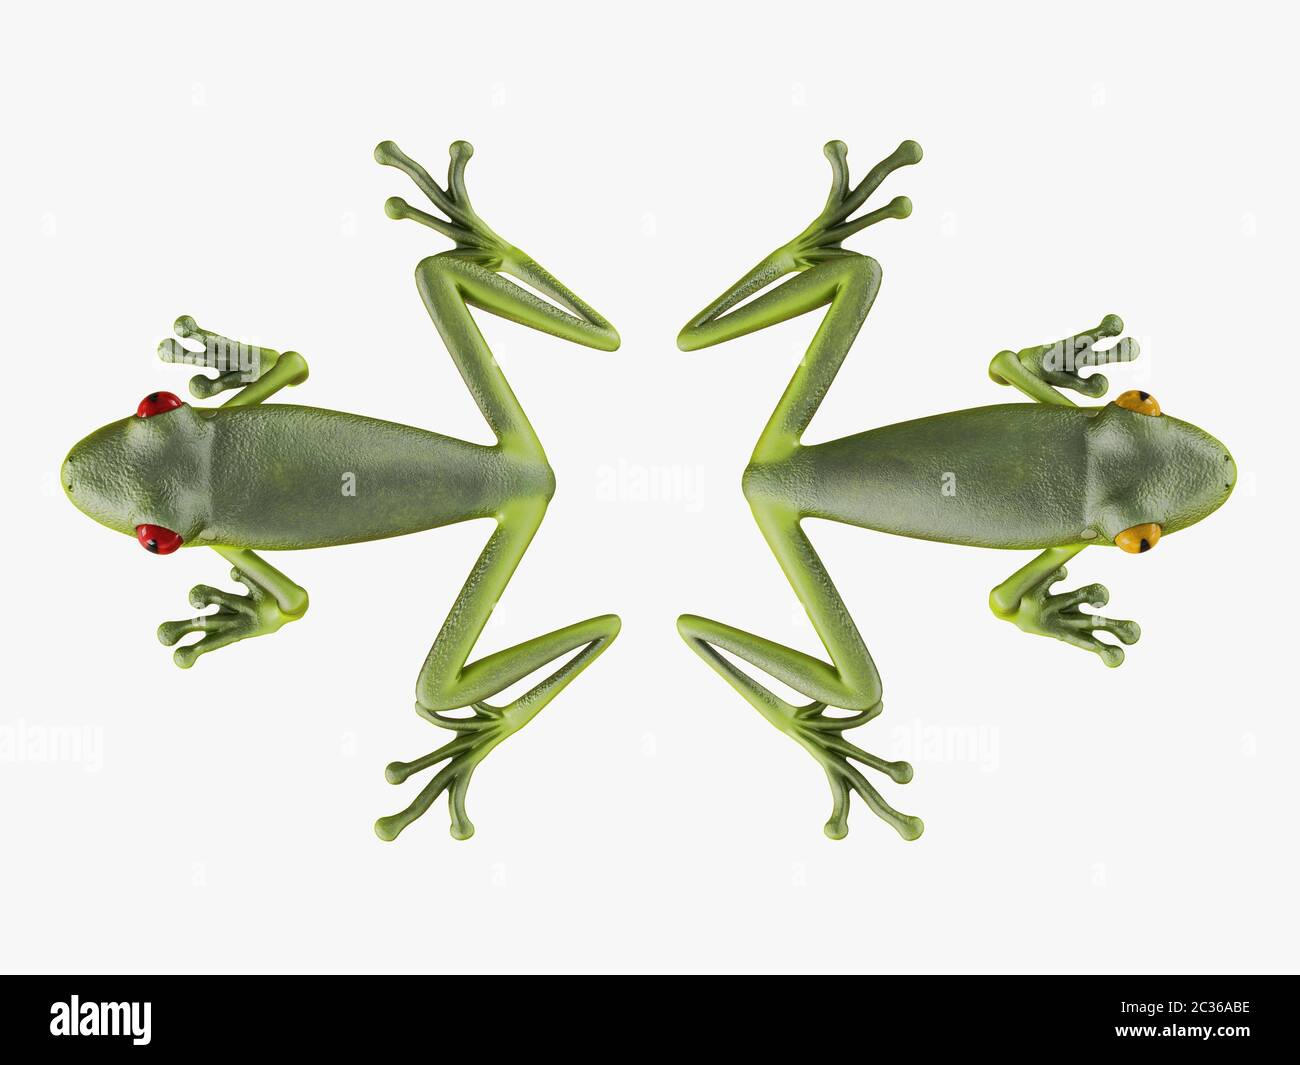 https://c8.alamy.com/comp/2C36ABE/two-frogs-turned-away-from-each-other-on-a-white-background-3d-rendering-2C36ABE.jpg